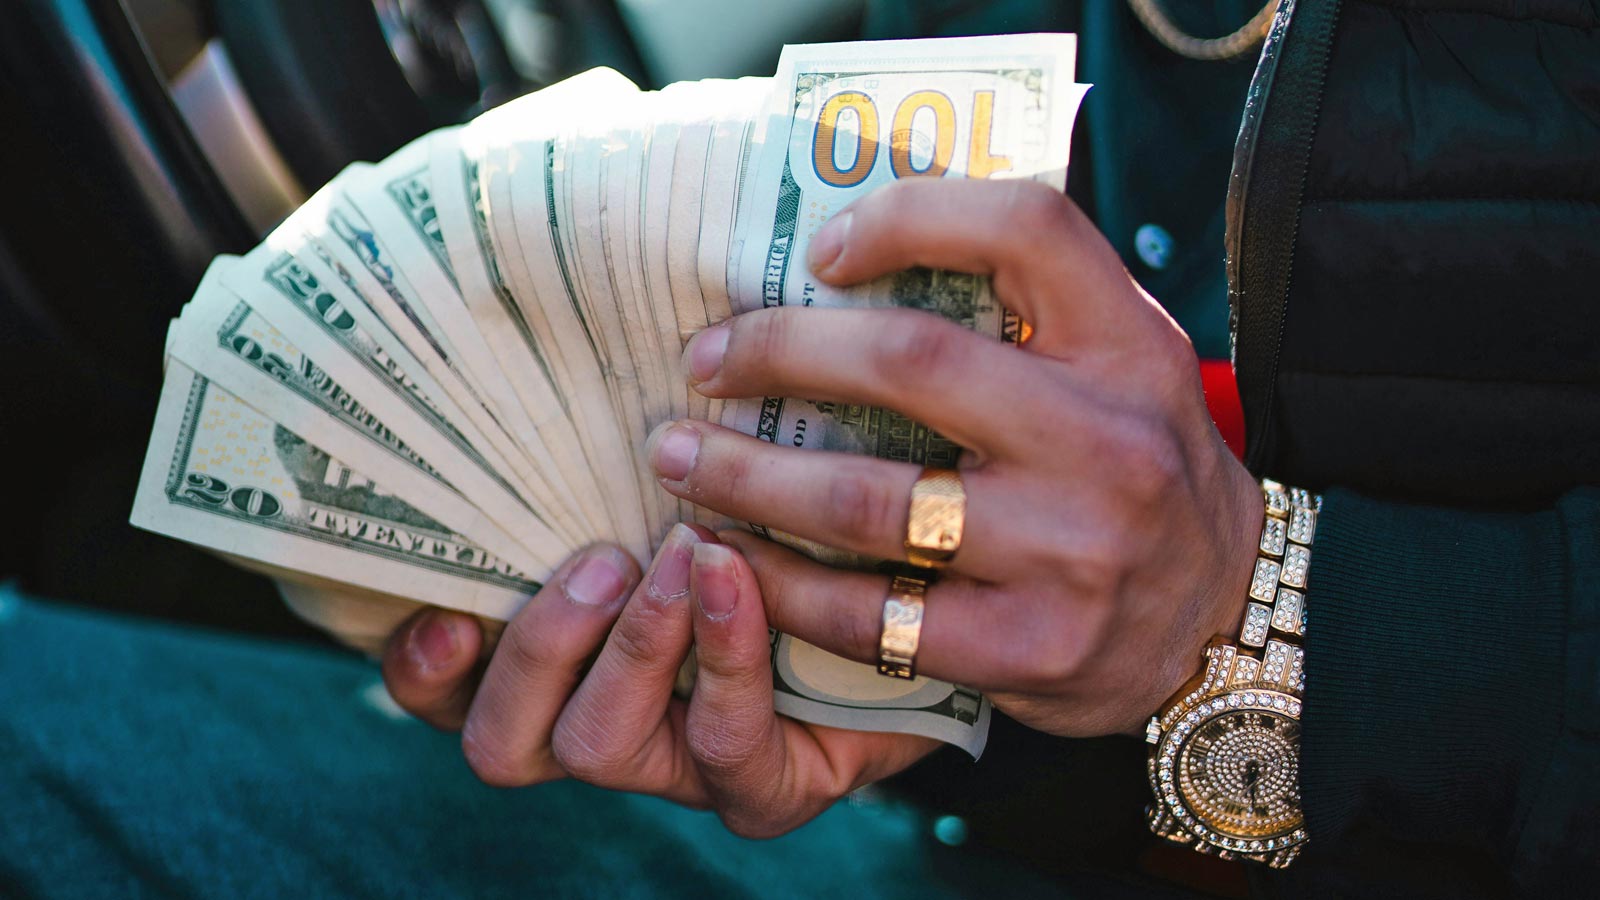 A person wearing flashy rings and a watch fans out a big stack of cash bills....